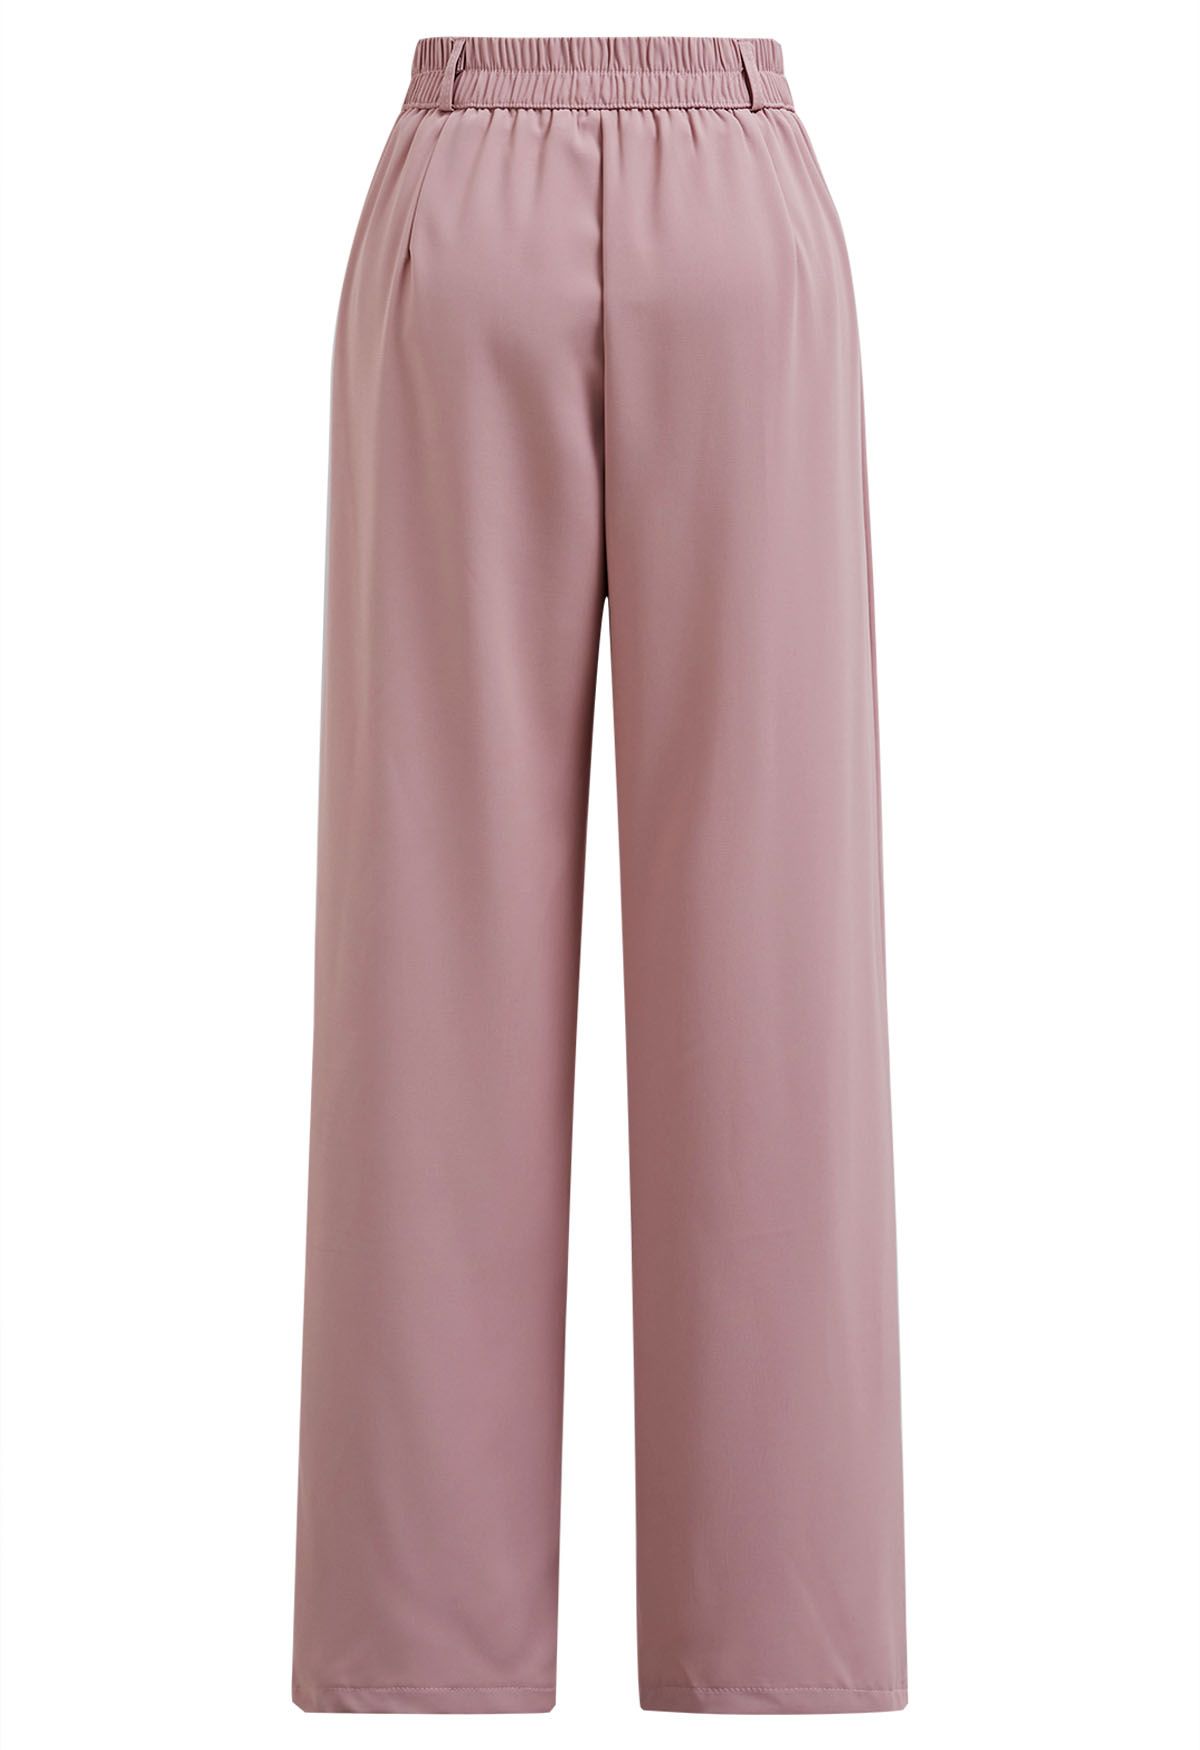 Simple Pleat Straight-Leg Pants in Pink - Retro, Indie and Unique Fashion